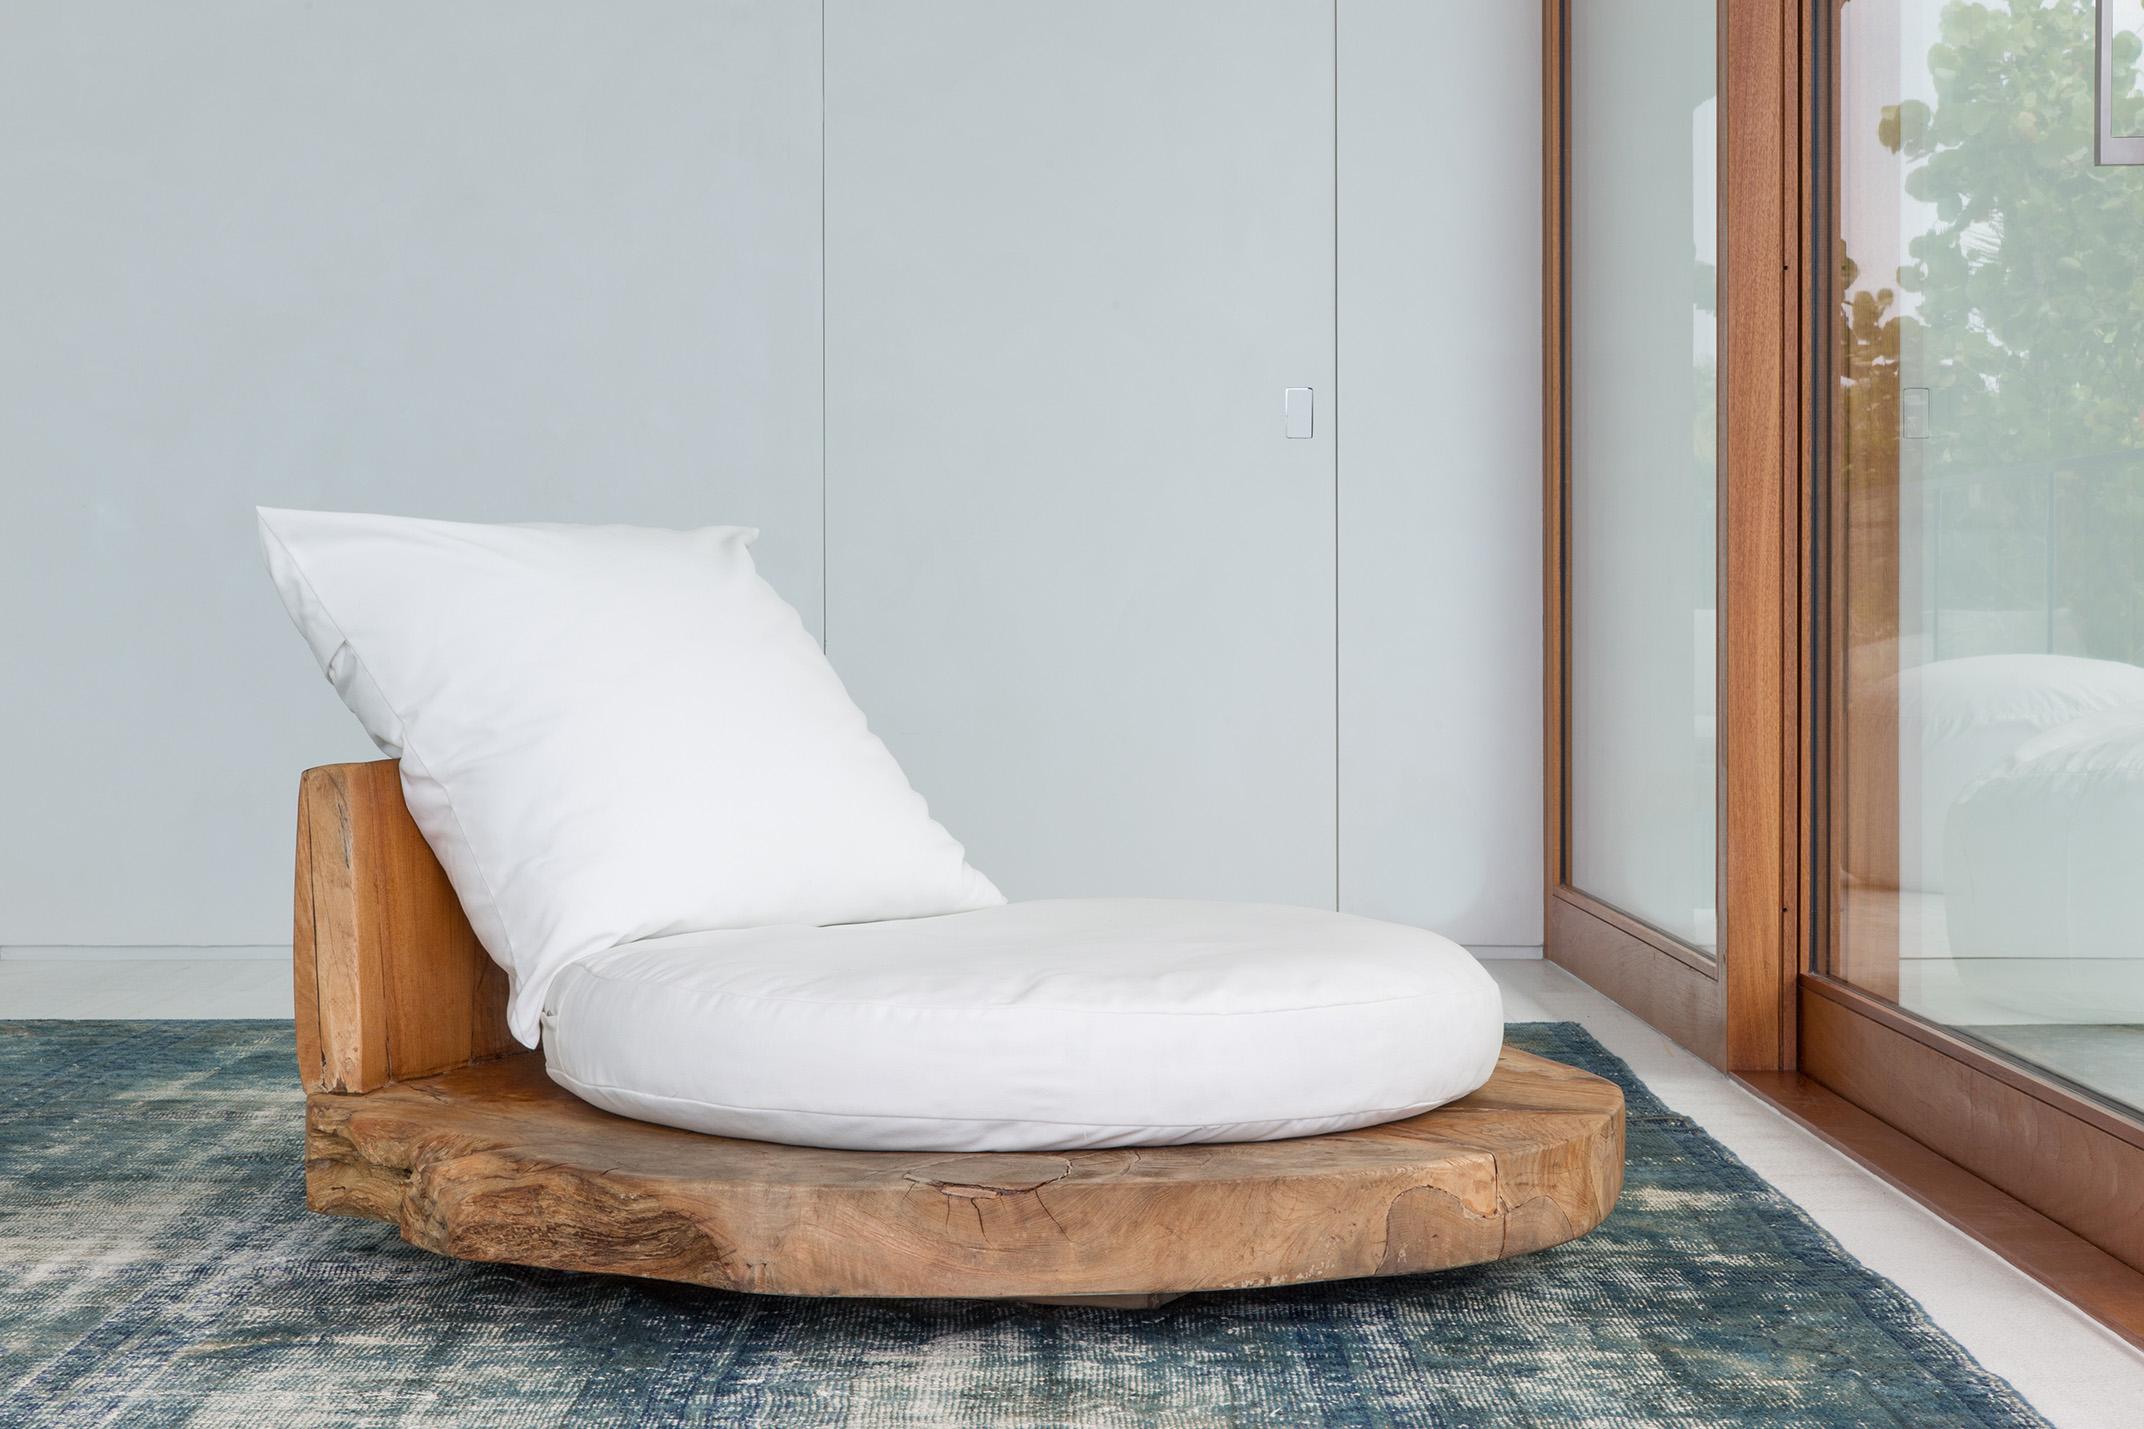 Round Organic Loungers by CEU

Solid pieces of salvaged wood are combined to make bold, organically shaped platforms. Designed for lounging these low seats can be used both in- and outdoors.

- Cushions included

- Sunbrella fabric or linen